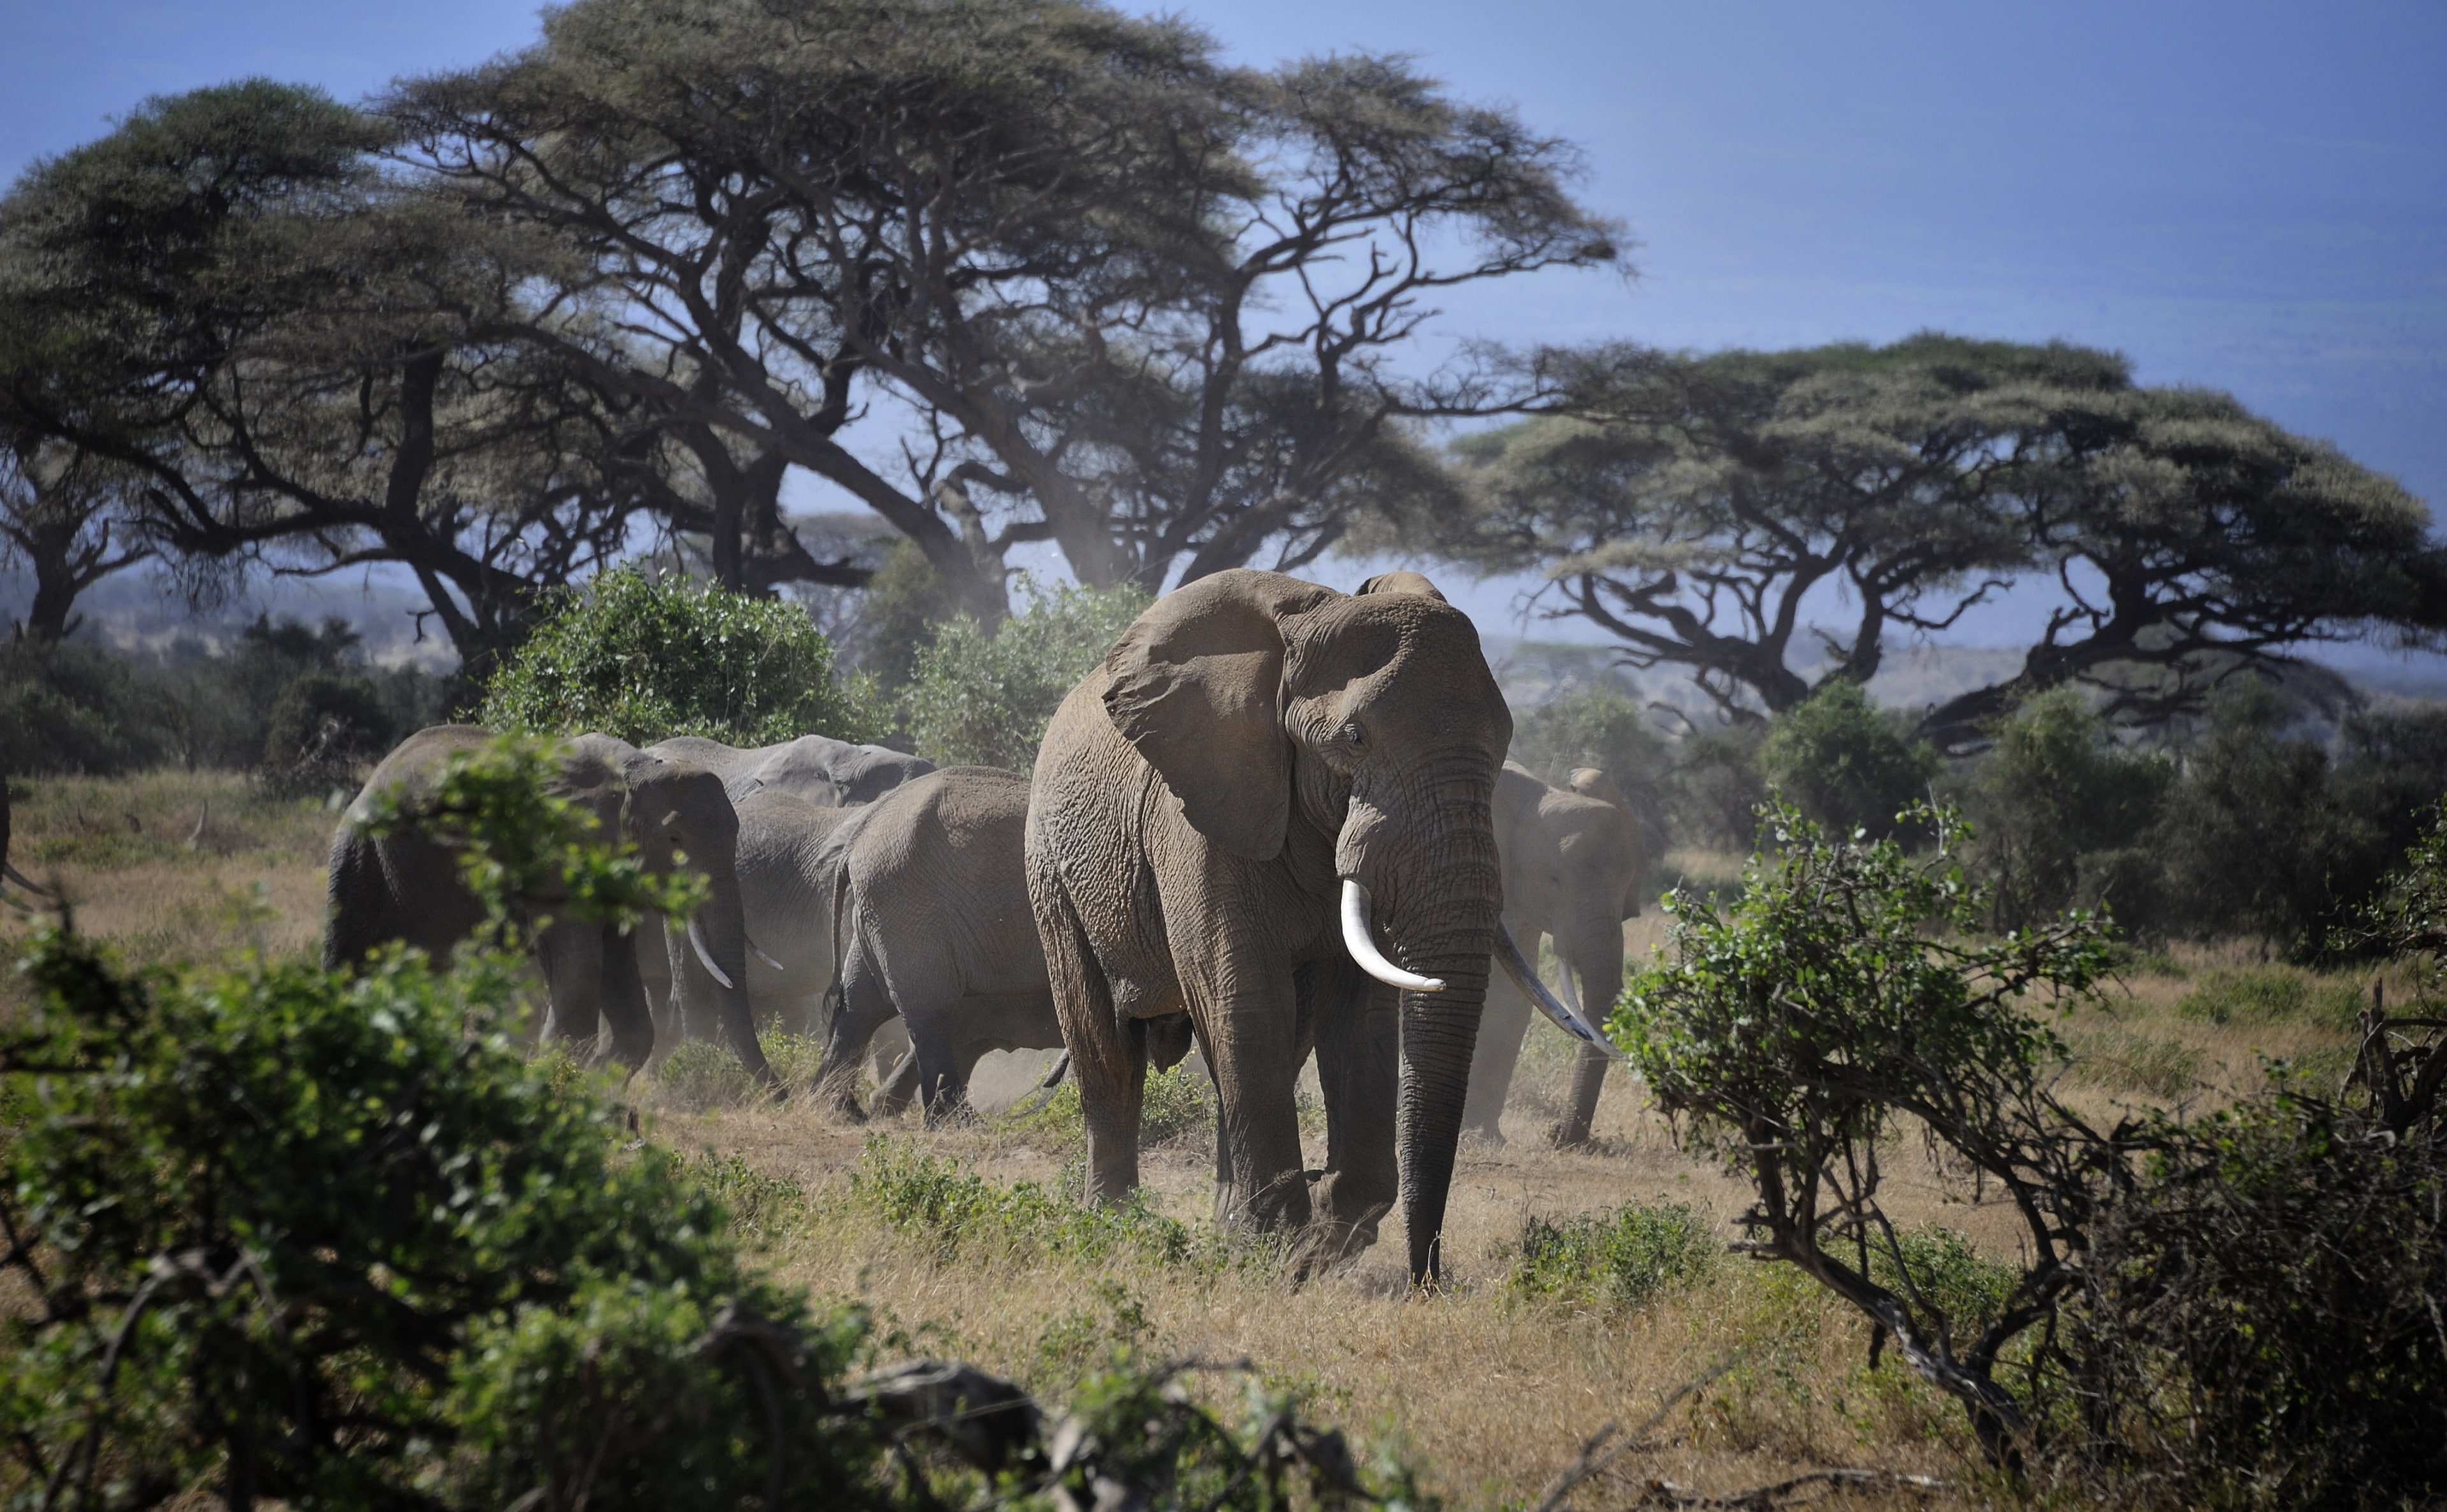 Leader of the Elephants, Travel, Africa, View, Protect, Nature